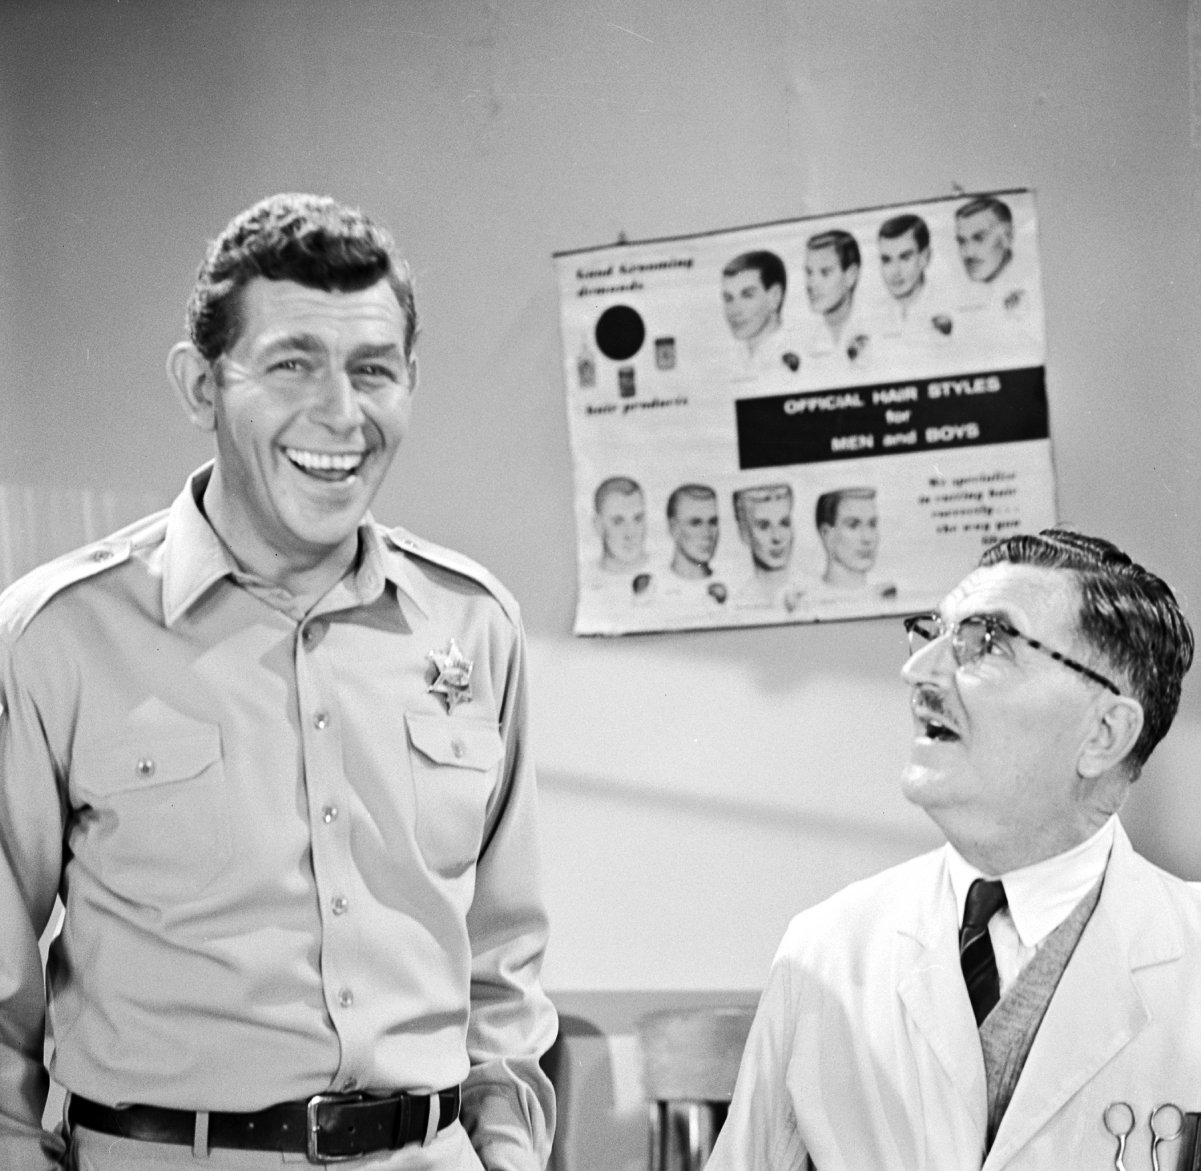 On the set of 'The Andy Griffith Show'